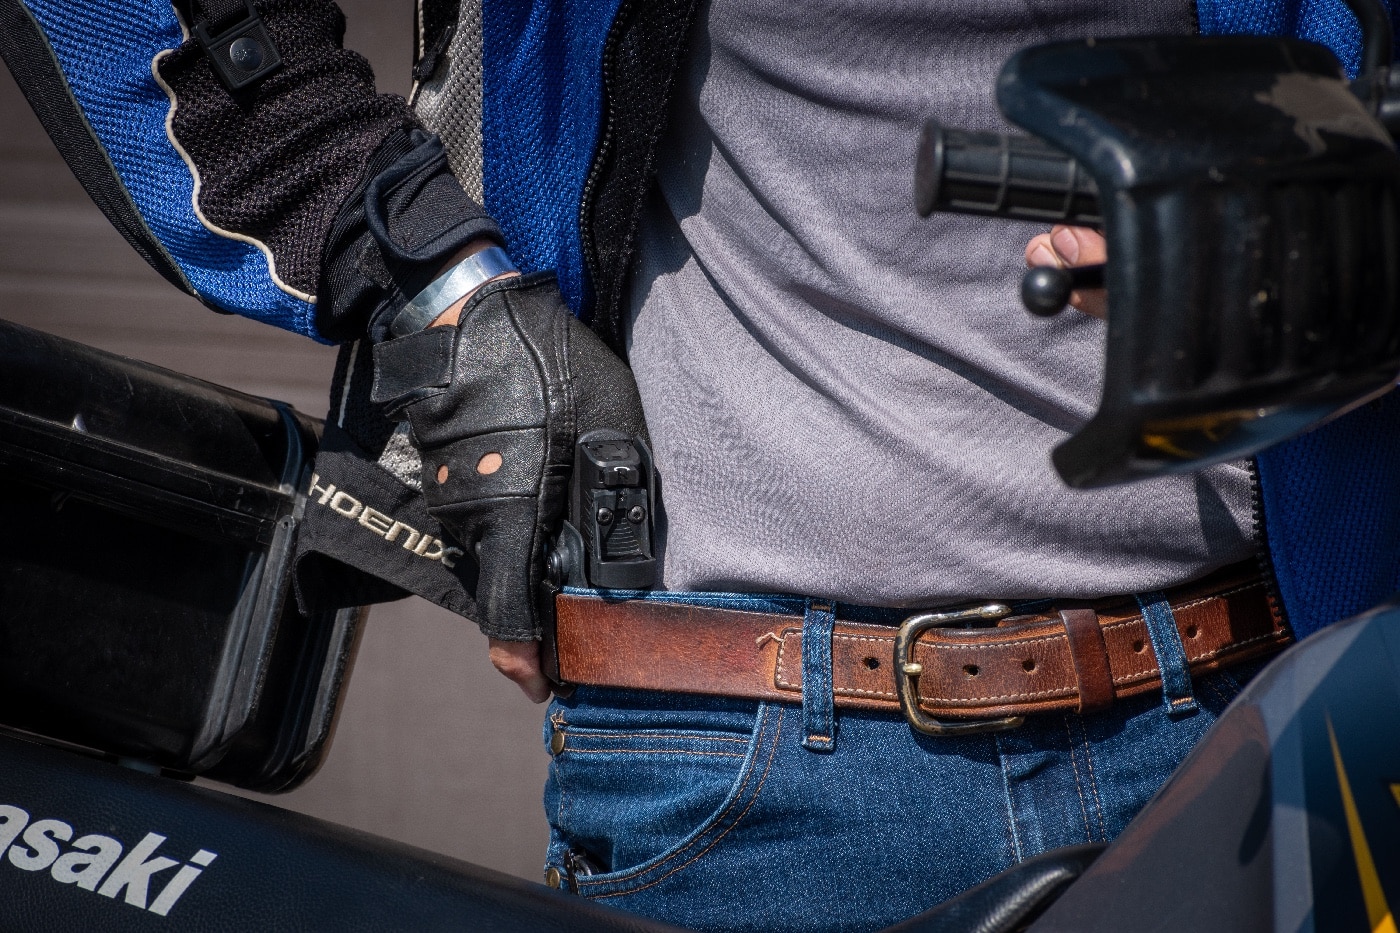 carrying iwb on a motorcycle